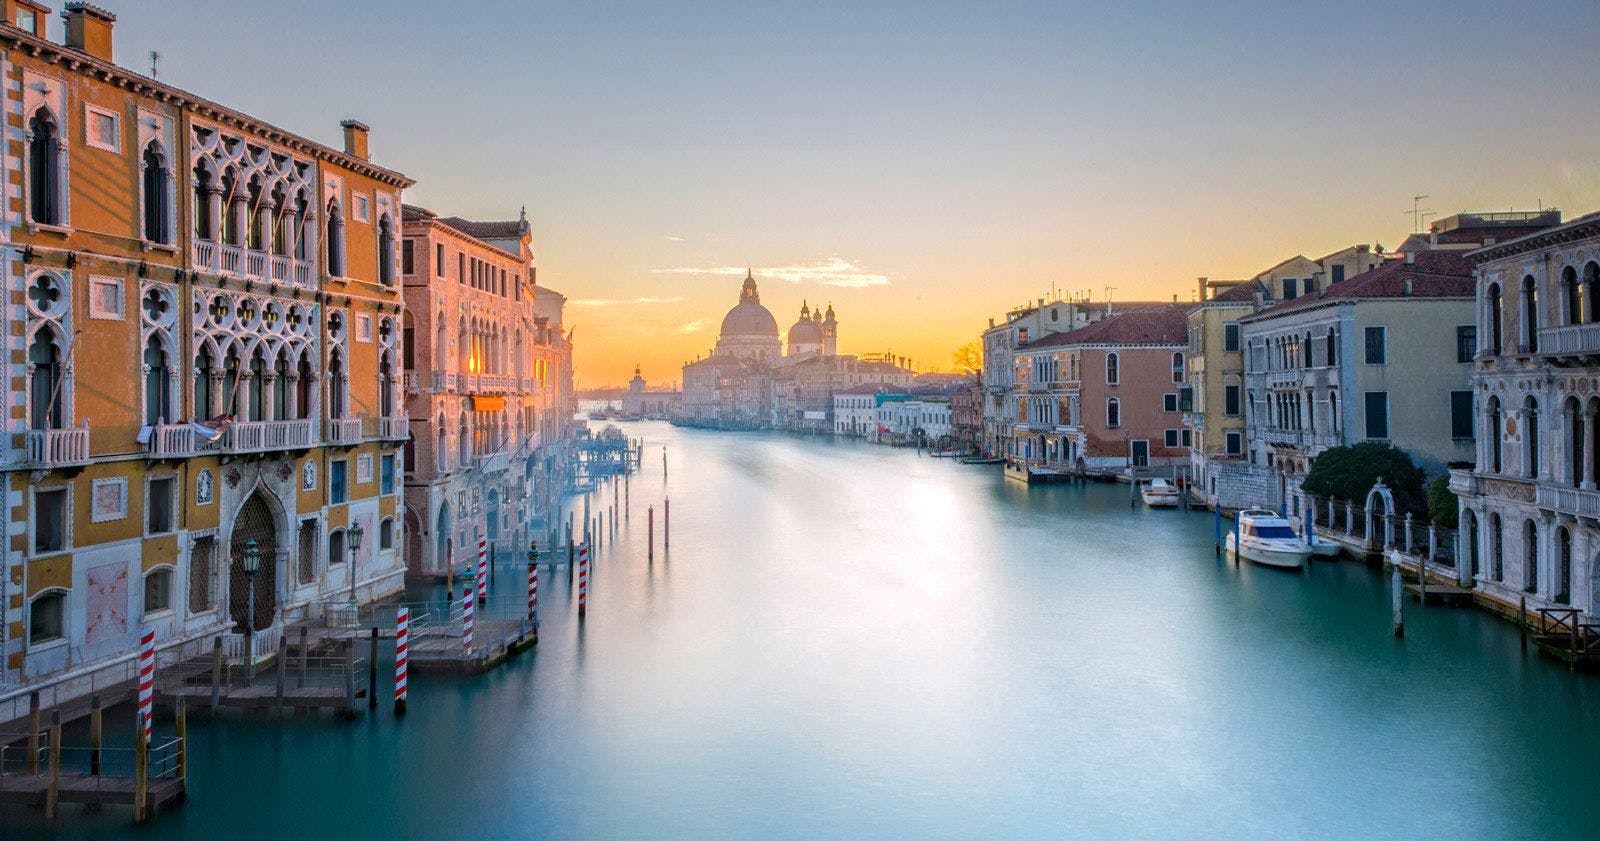 The Grand Canal of Venice on a misty morning